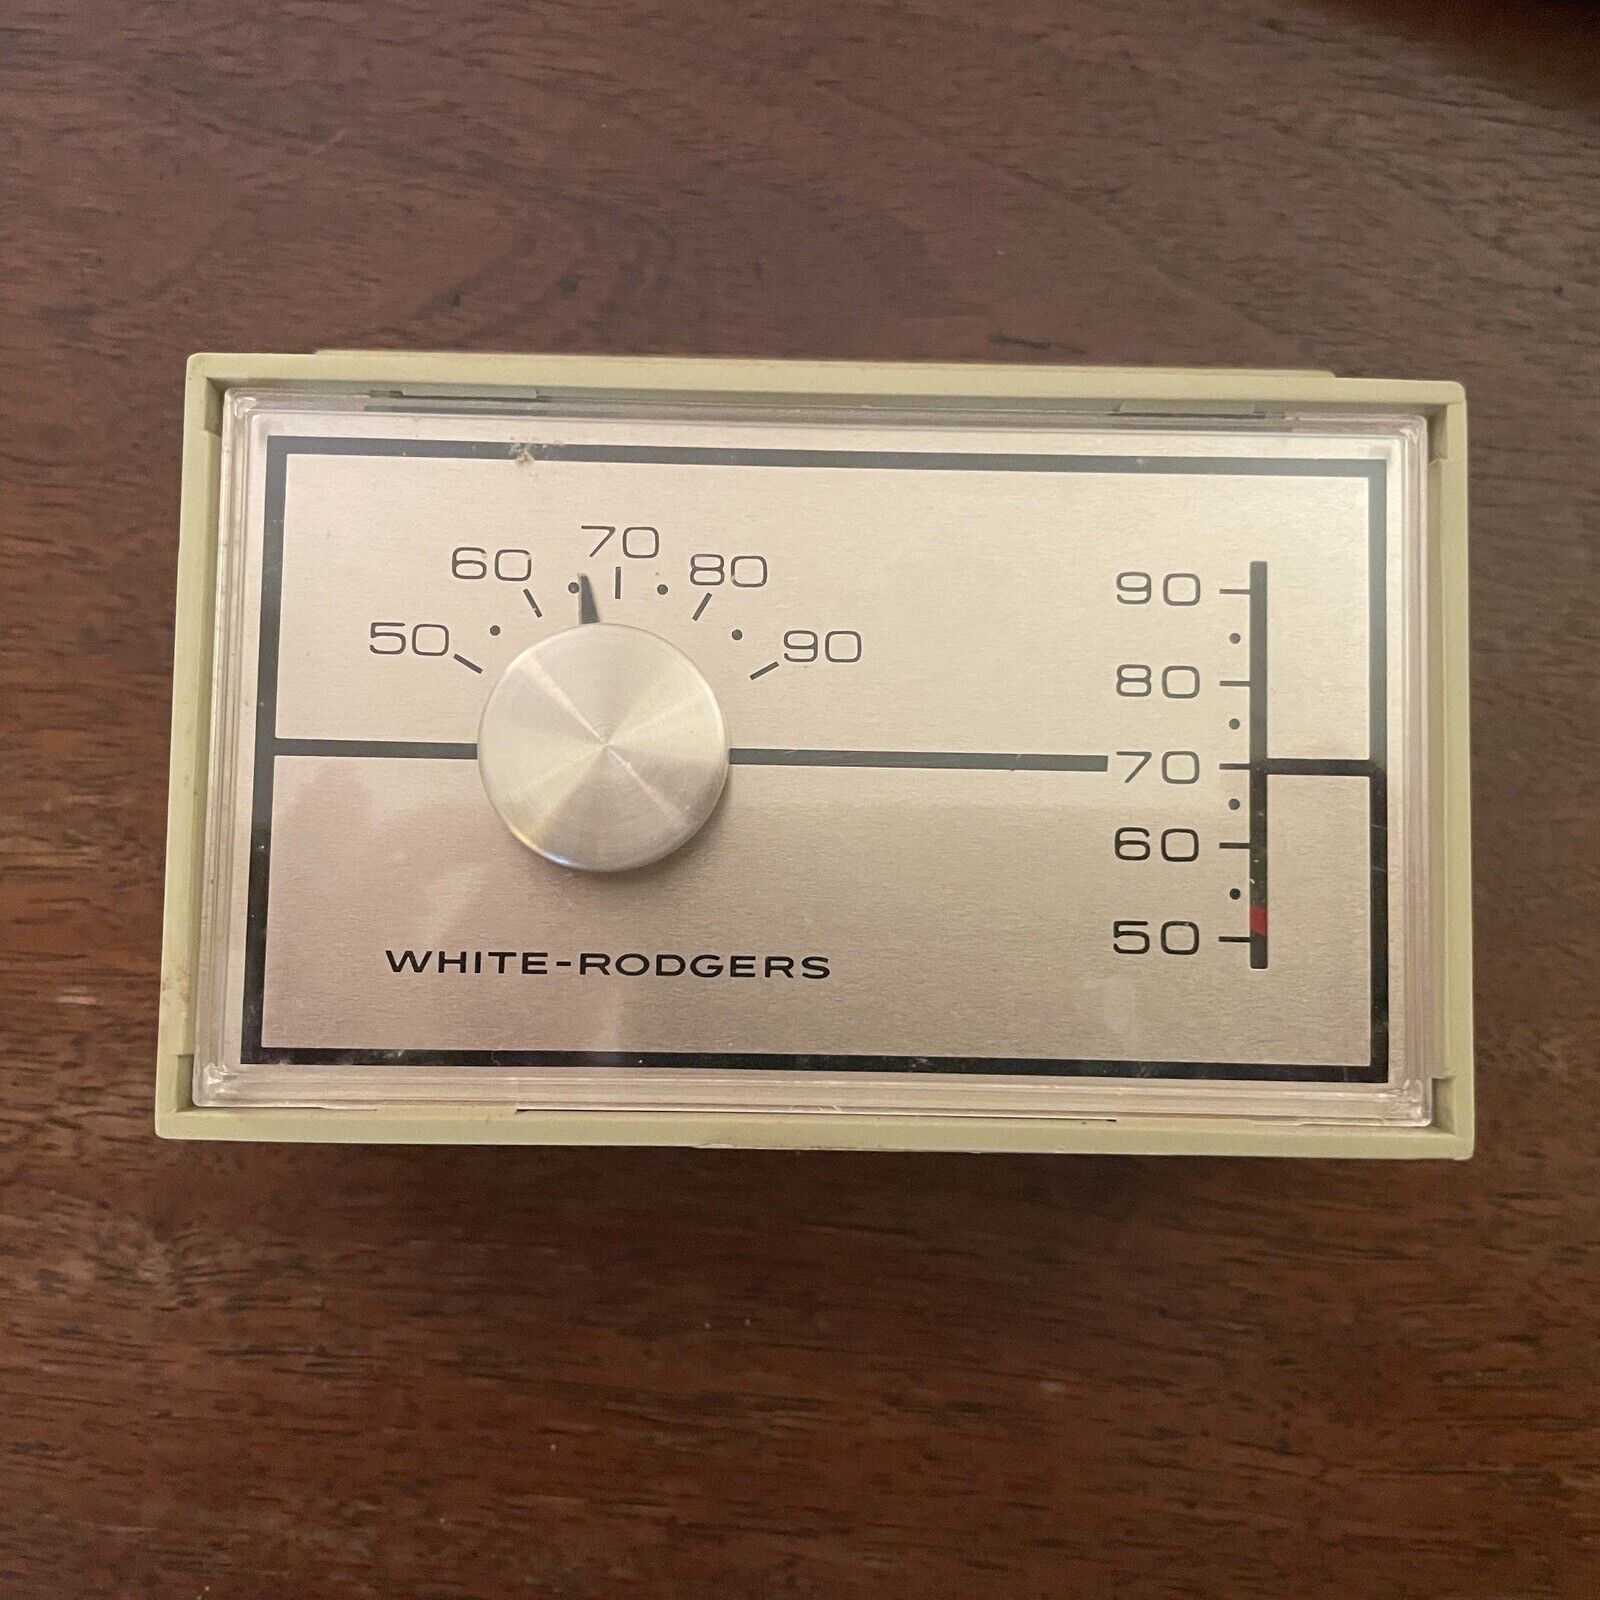 Vintage White- Rodgers Heat Pump Thermostat Heating Cooling Mercury MCM